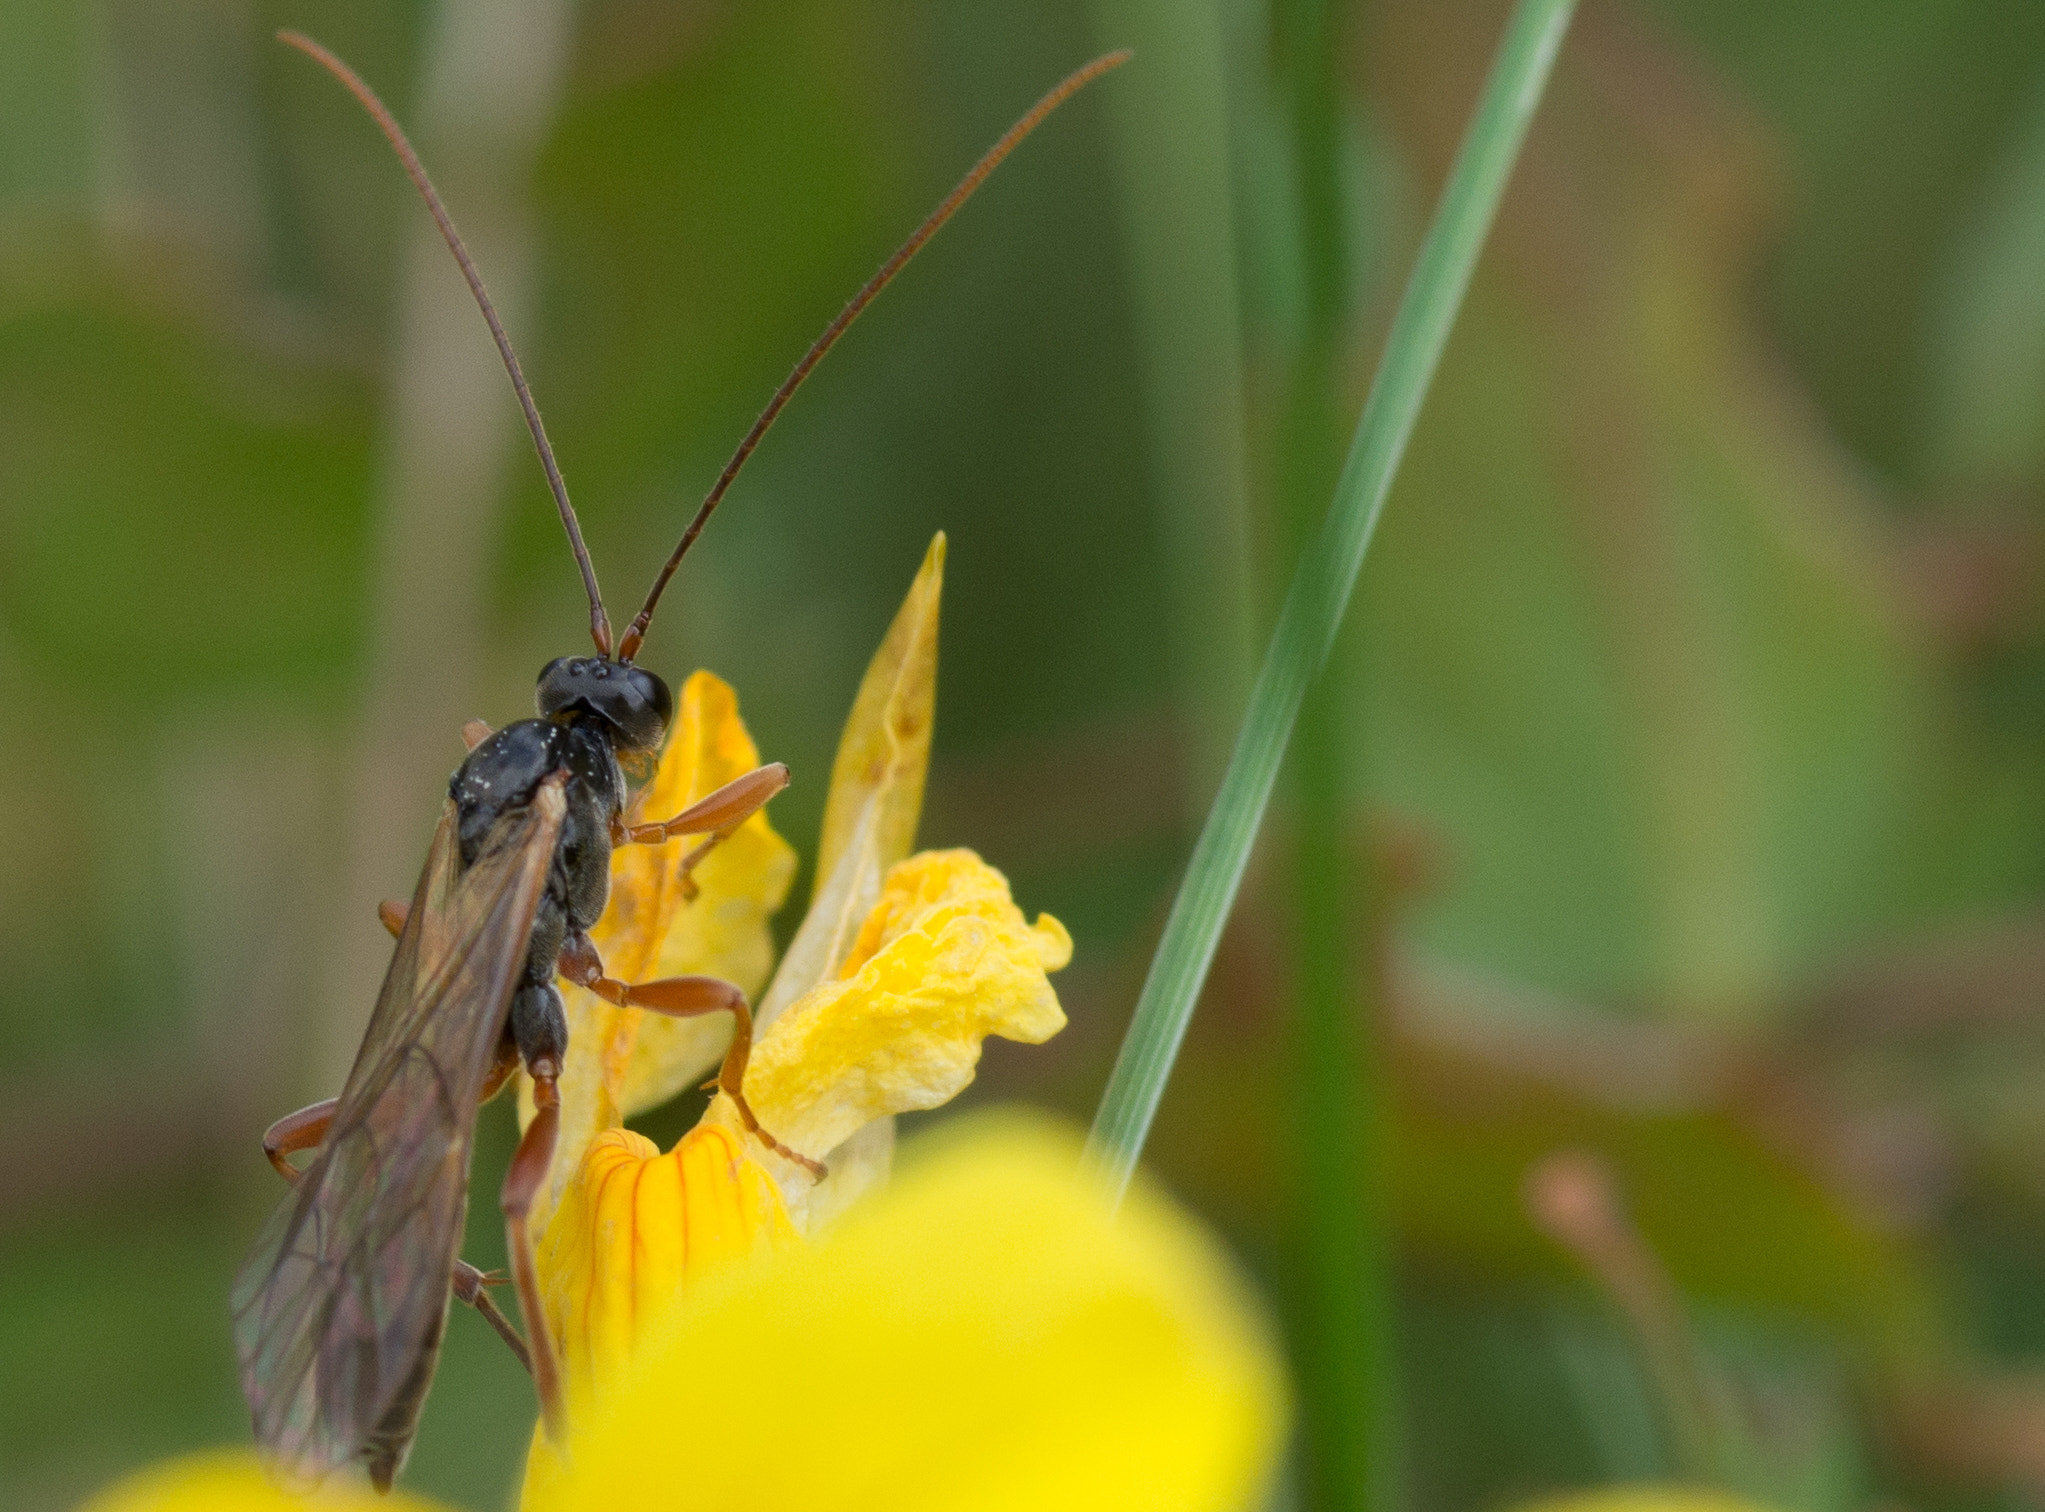 Pentax K-30 sample photo. Insect photography